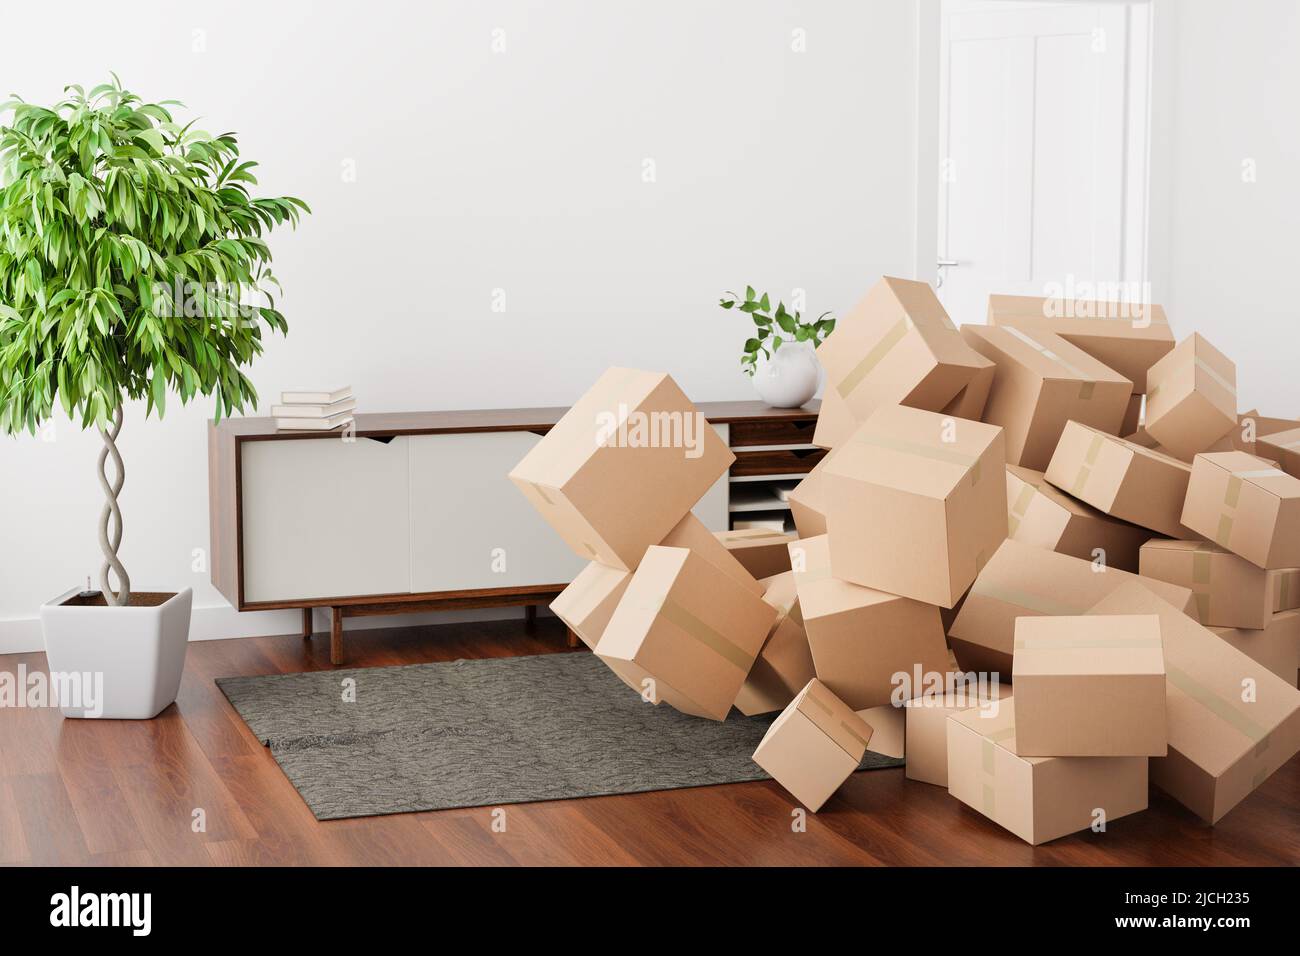 Differently sized cardboard boxes falling into a living room. Concept image for consumerism, online shopping Stock Photo